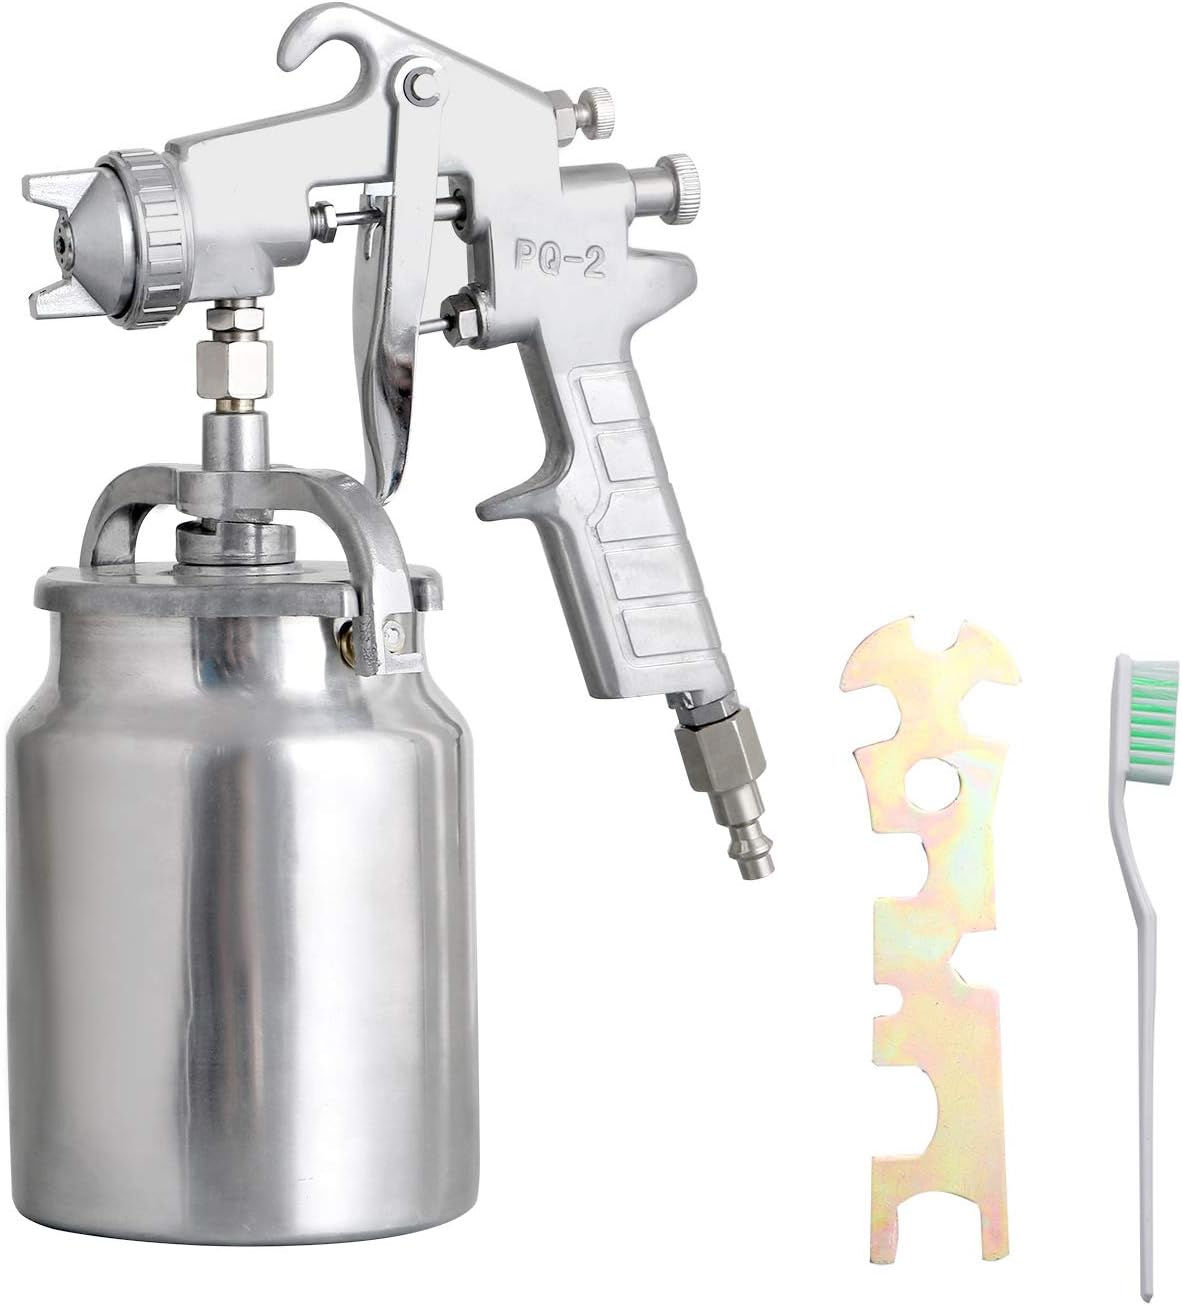 Professional Siphon Feed Spray Gun - 1.8mm Nozzle for [...]